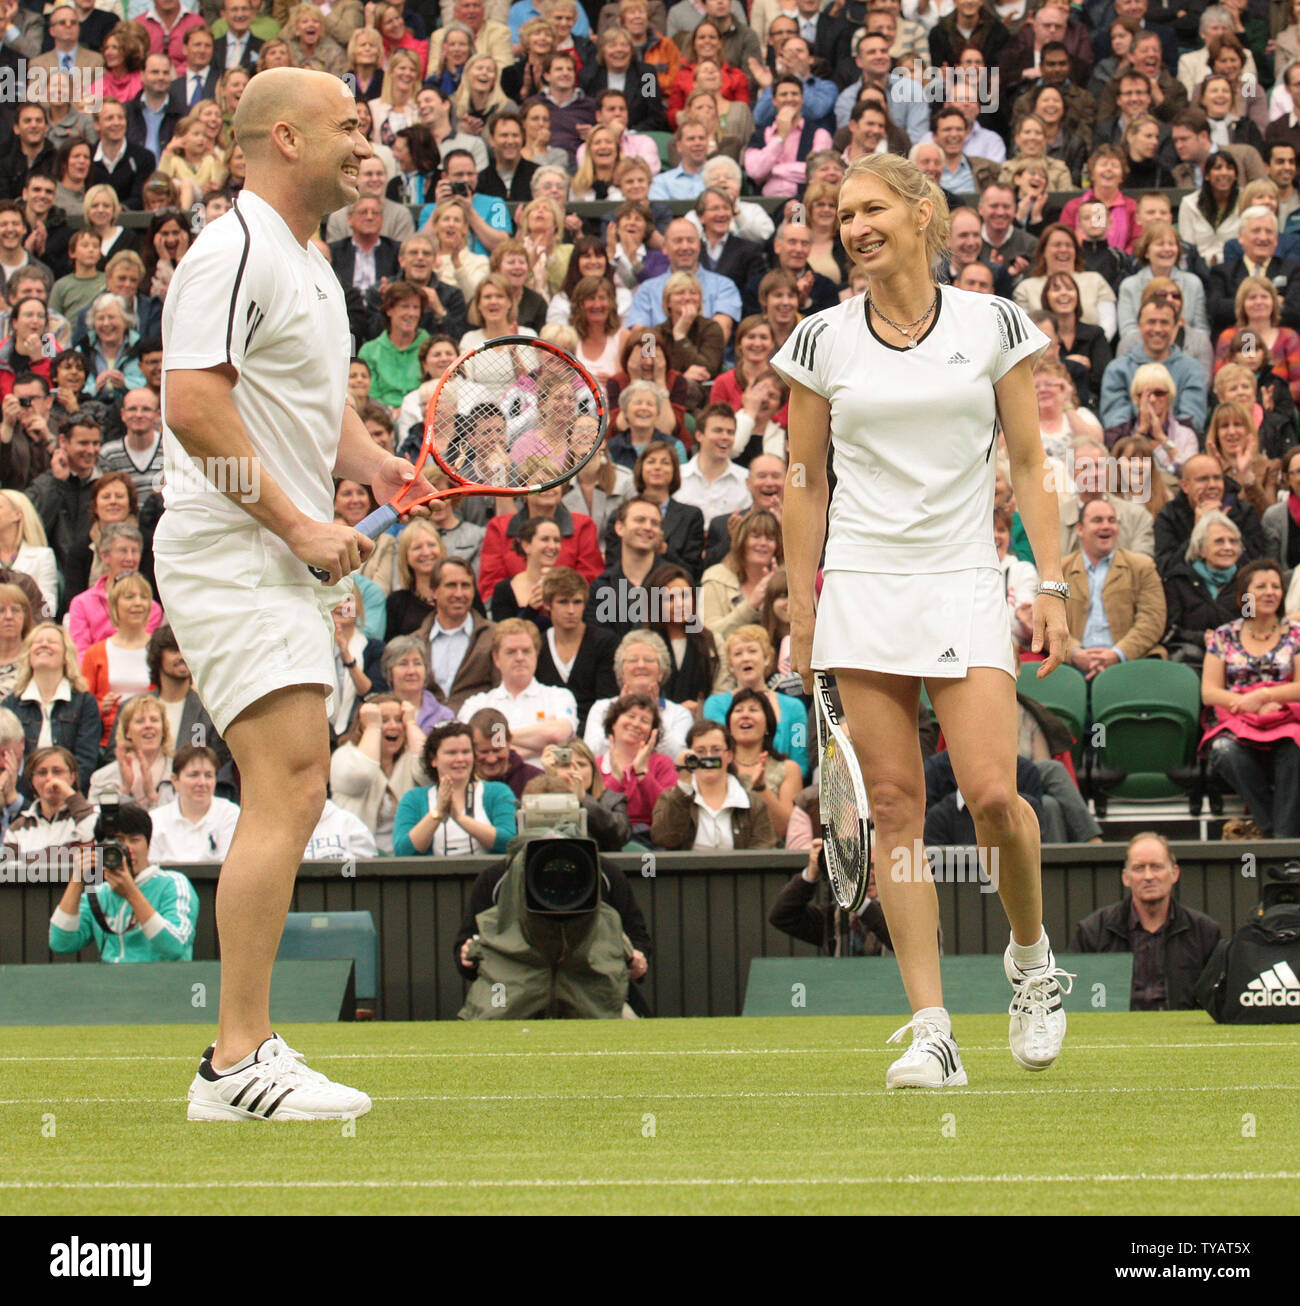 American tennis star Andre Agassi plays a mixed doubles match with wife Steffi Graf against Britain Tim Henman and Kim Clijsters. The match was played to celebrate the first game on the new Wimbledon center court with the roof fully closed on Sunday May 17 2009. (UPI Photo/Hugo Philpott) Stock Photo